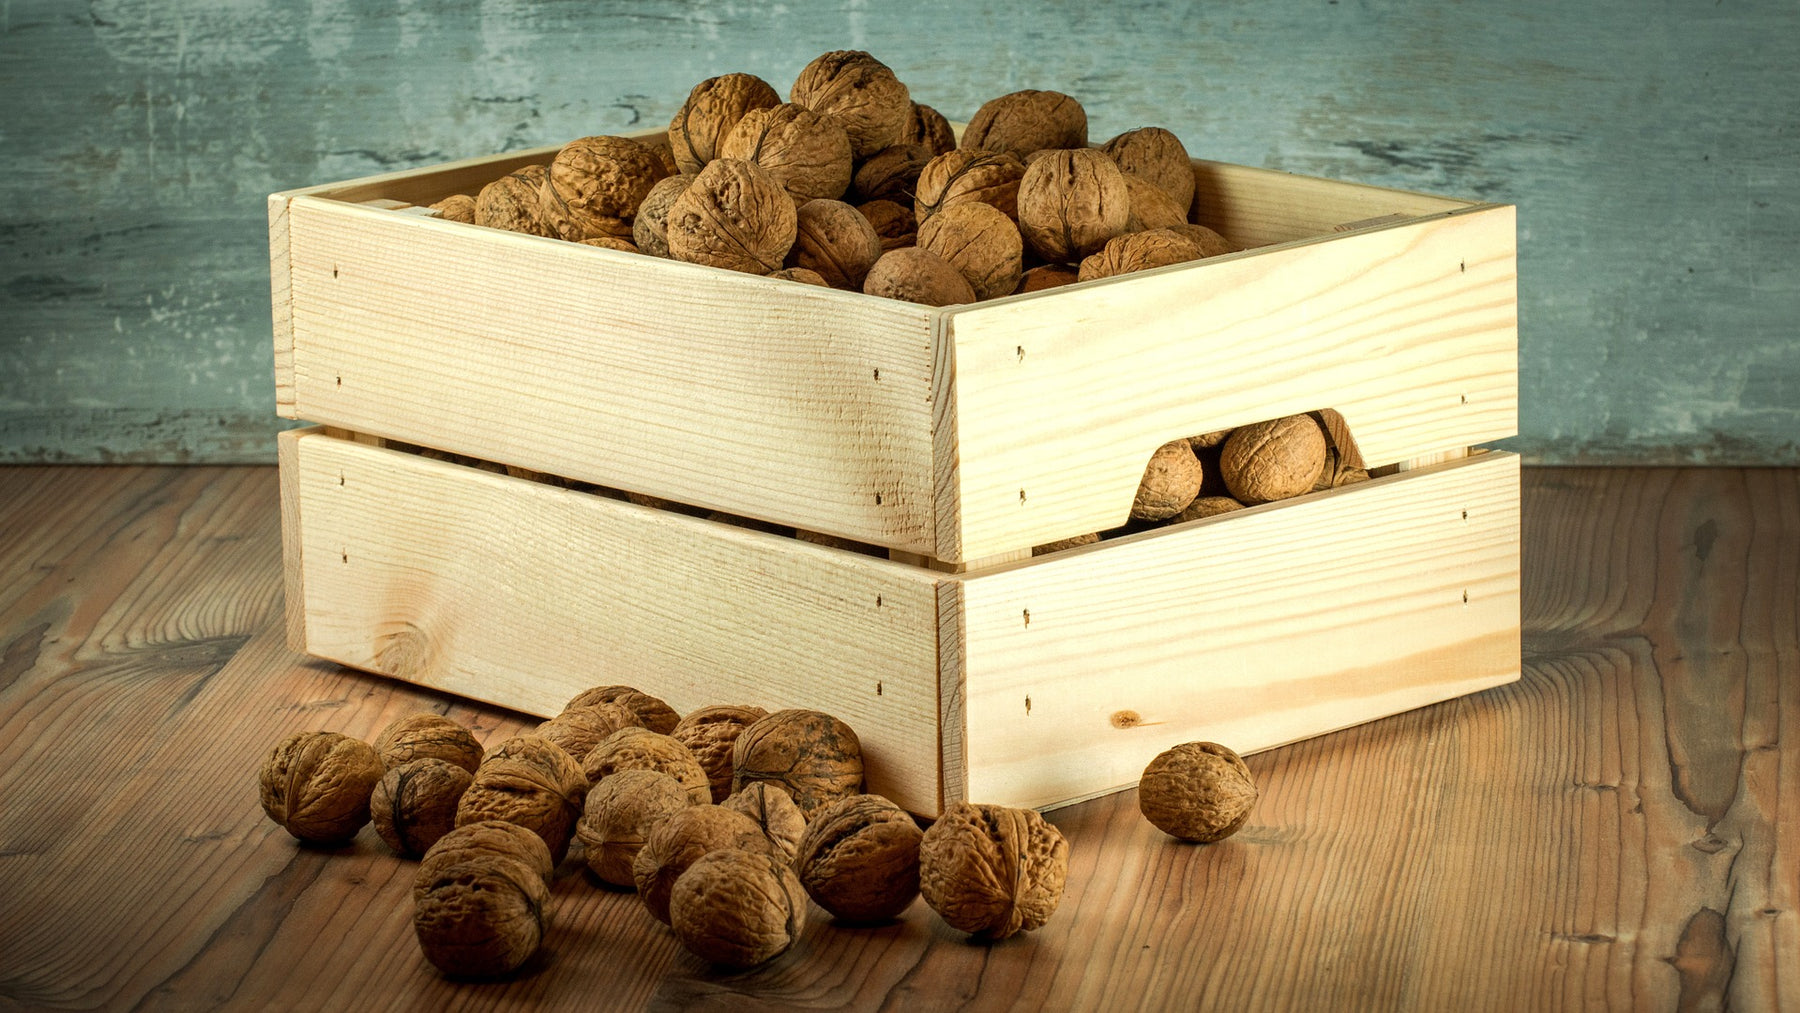 Nuts in a wood container over the floor